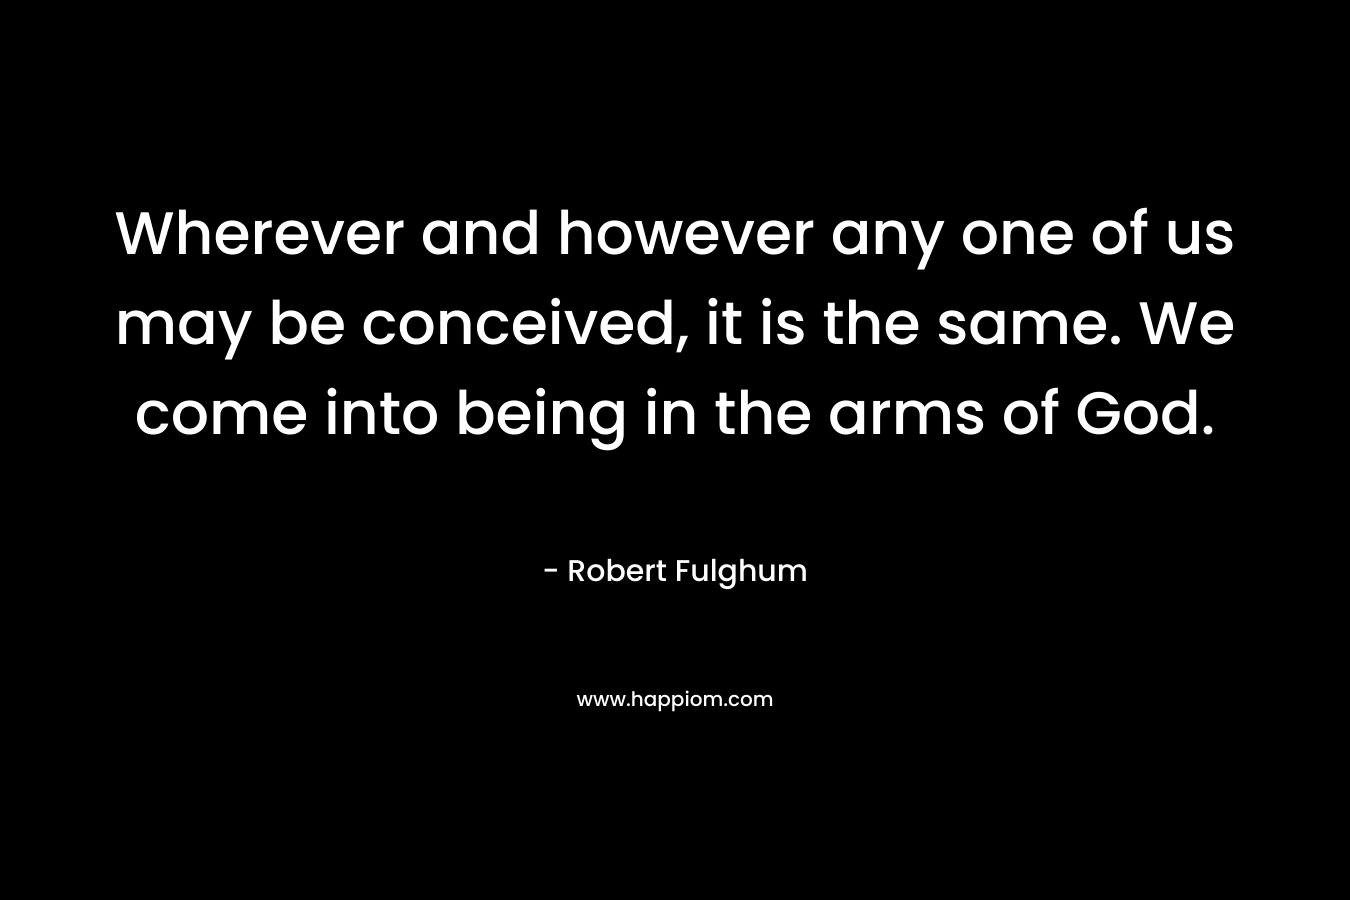 Wherever and however any one of us may be conceived, it is the same. We come into being in the arms of God. – Robert Fulghum